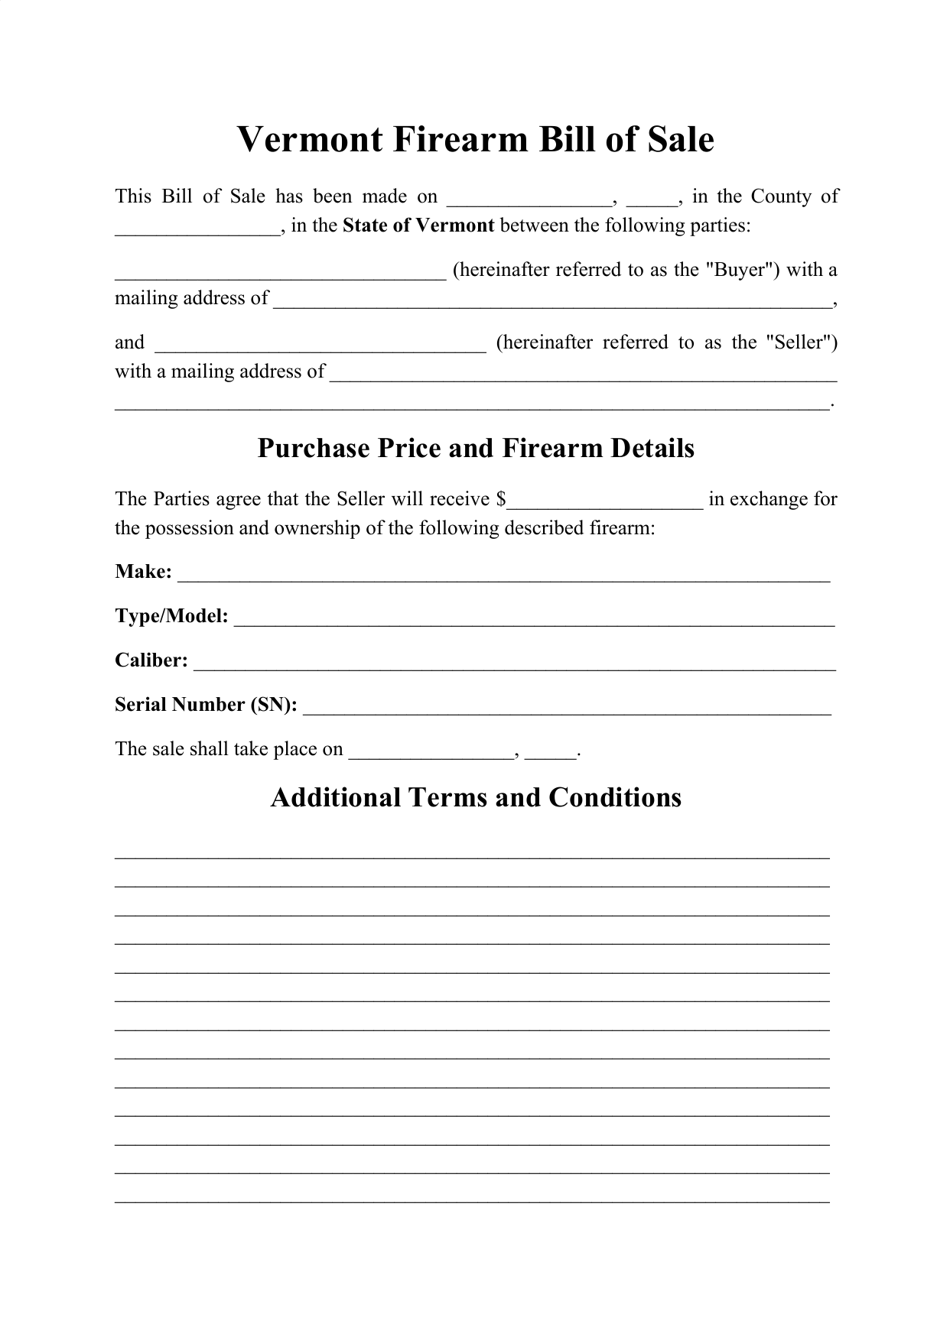 Firearm Bill of Sale Form - Vermont, Page 1